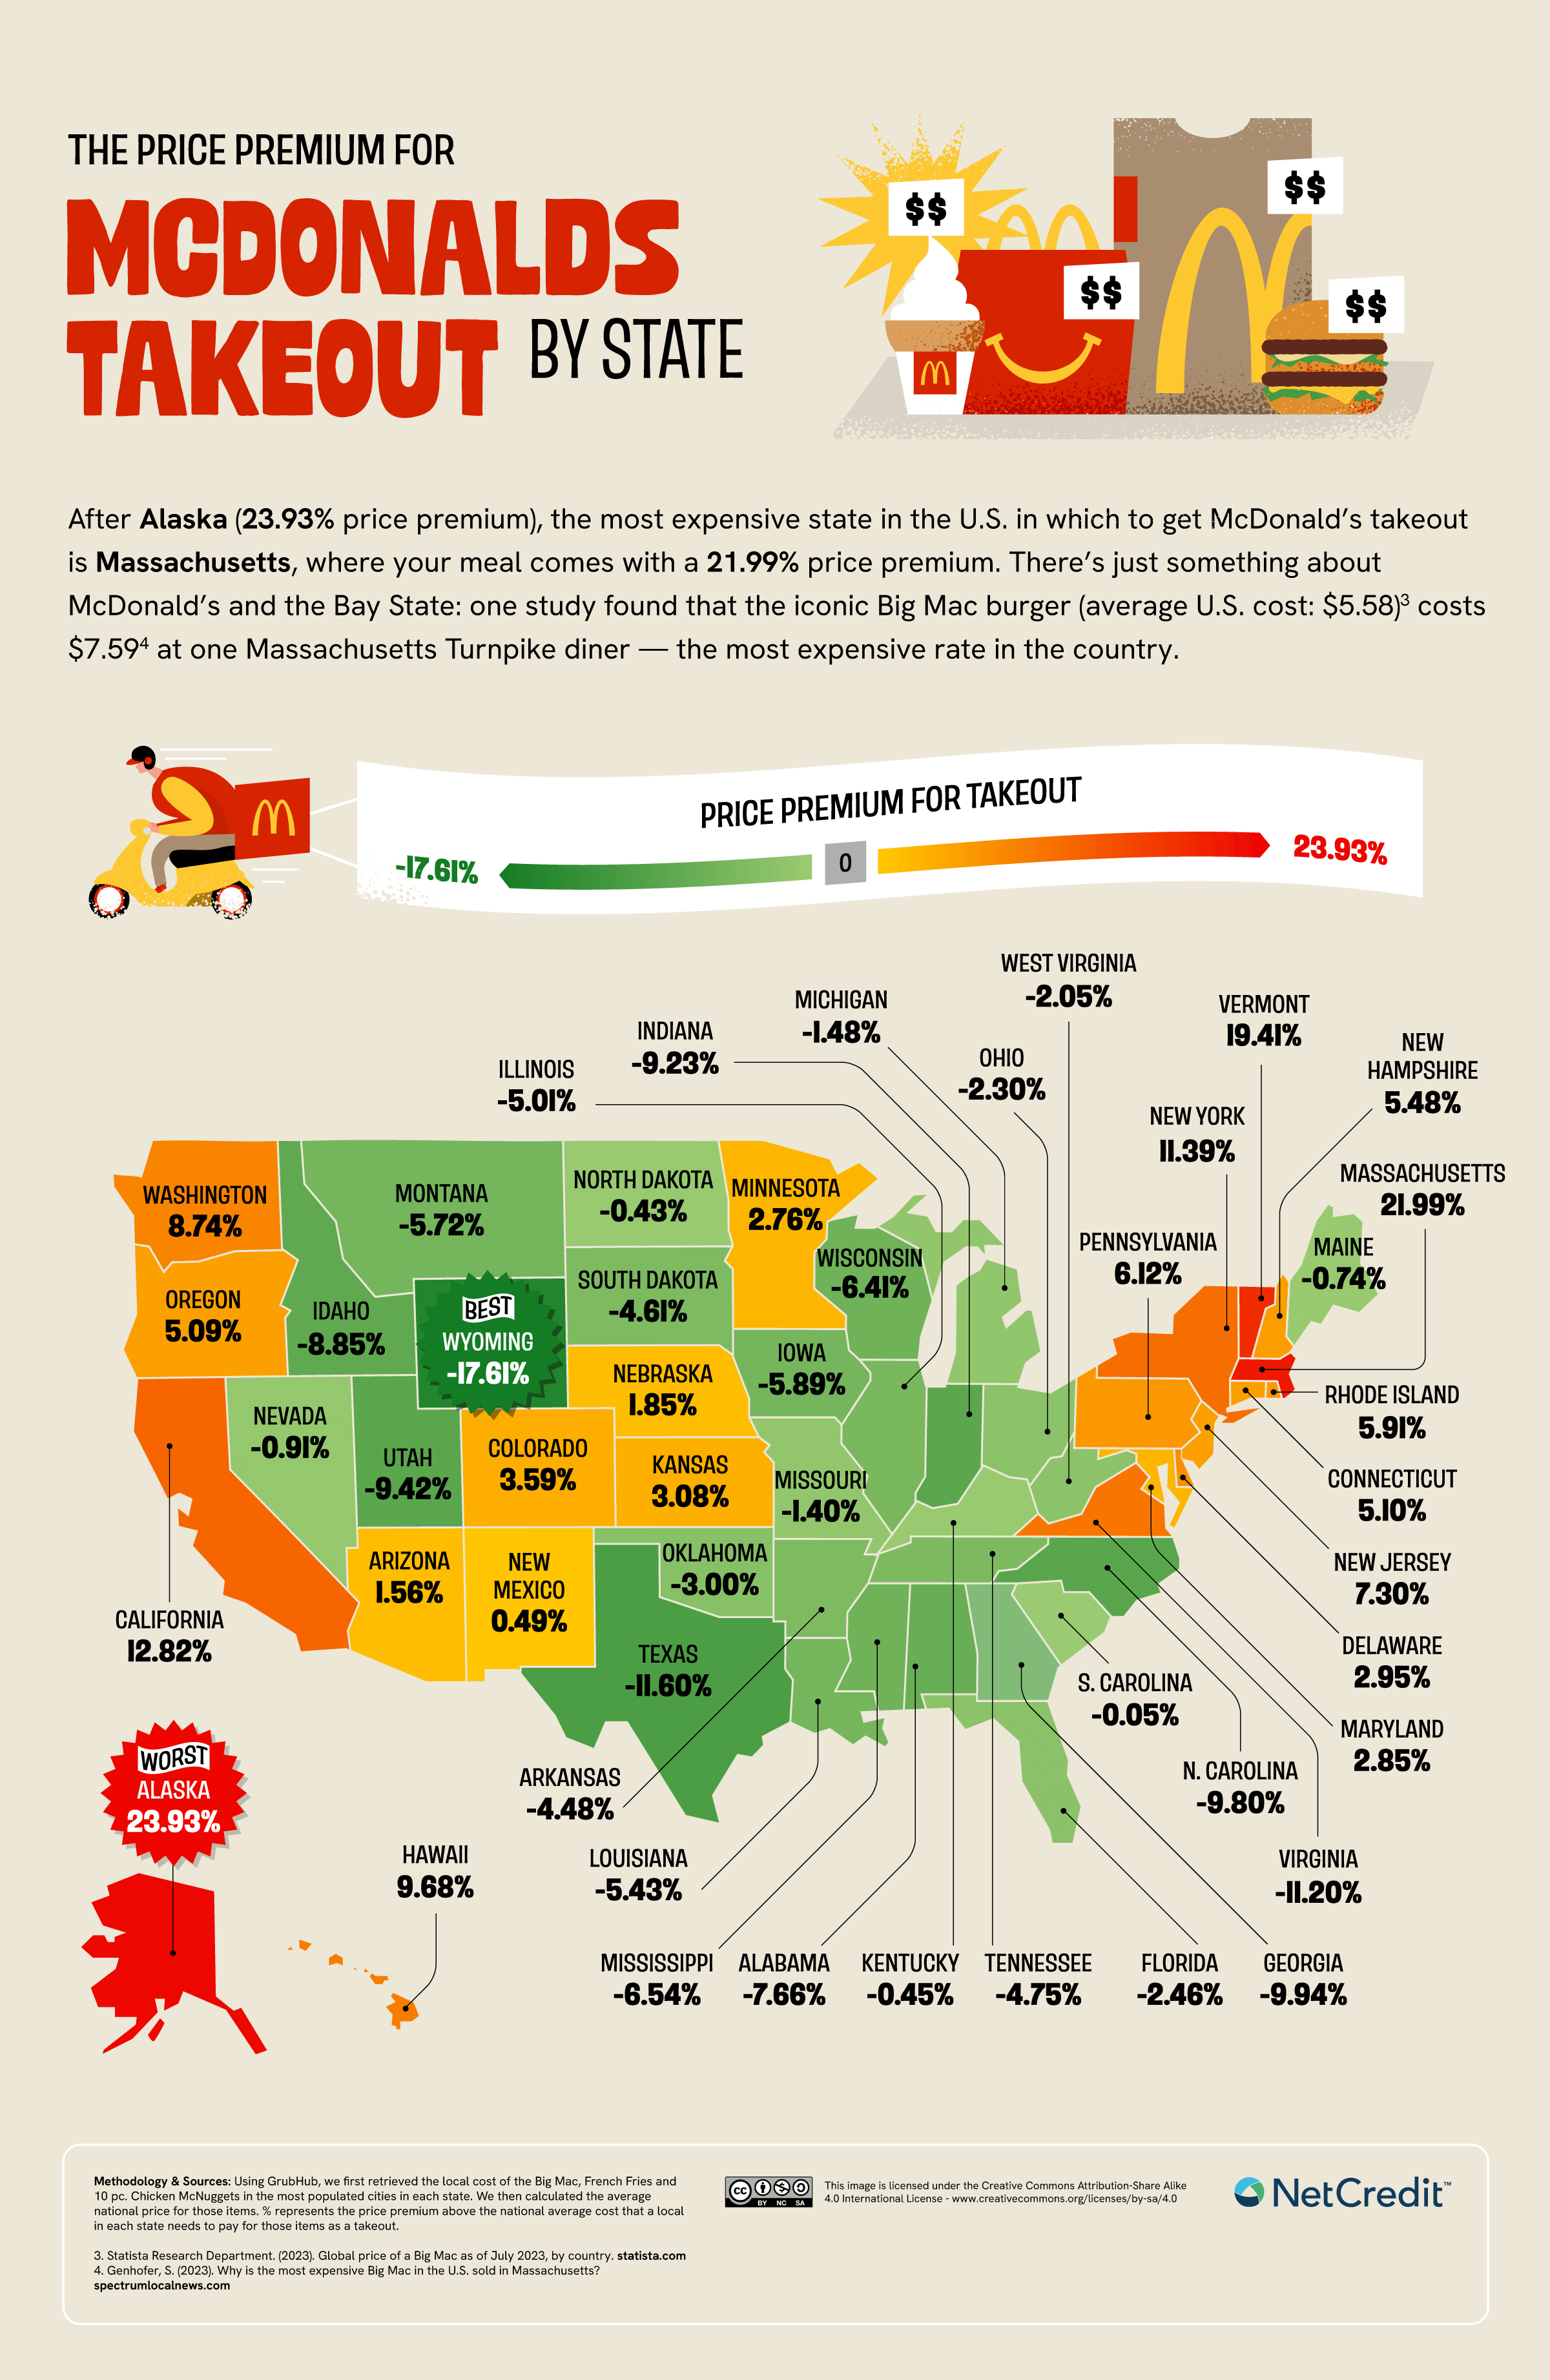 Infographic of price premium for McDonald's takeout by state.